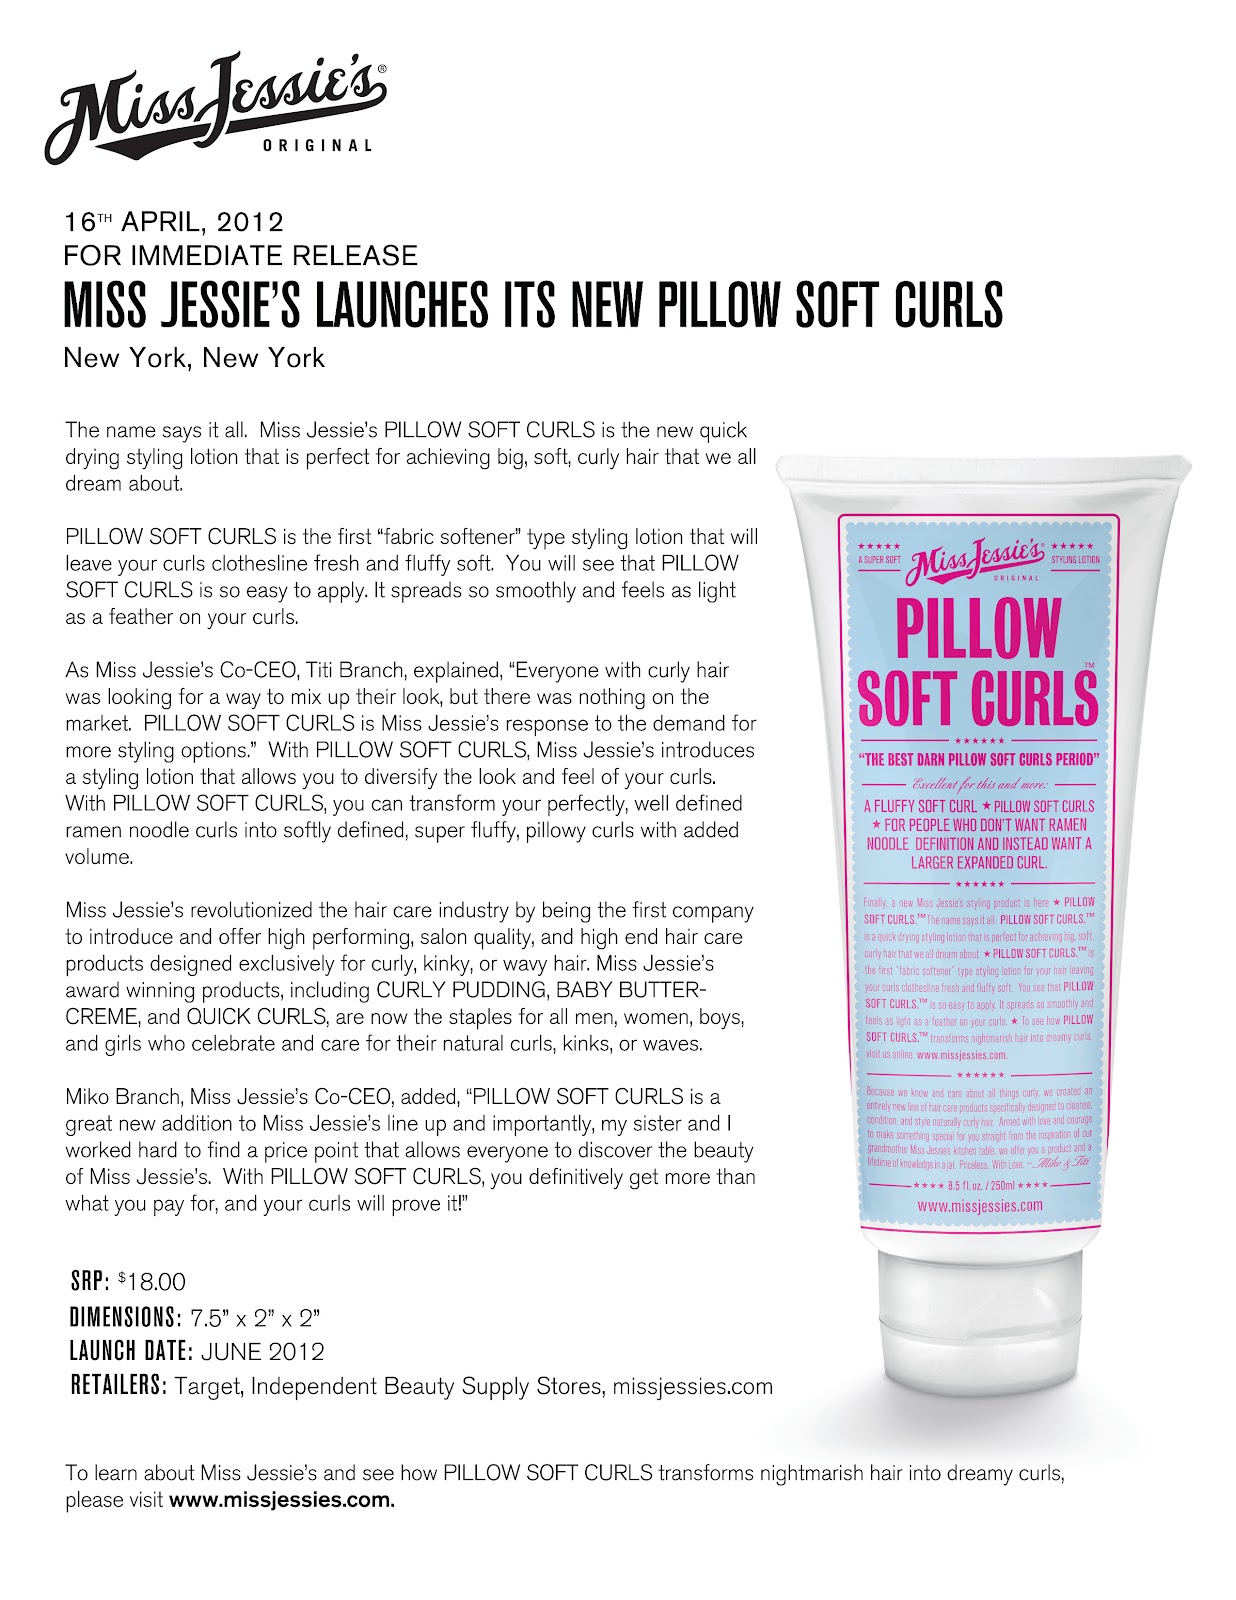 Press products. Press release example. Pillow Soft Curls. Thebest darn Curl Cremes period перевести. New product.